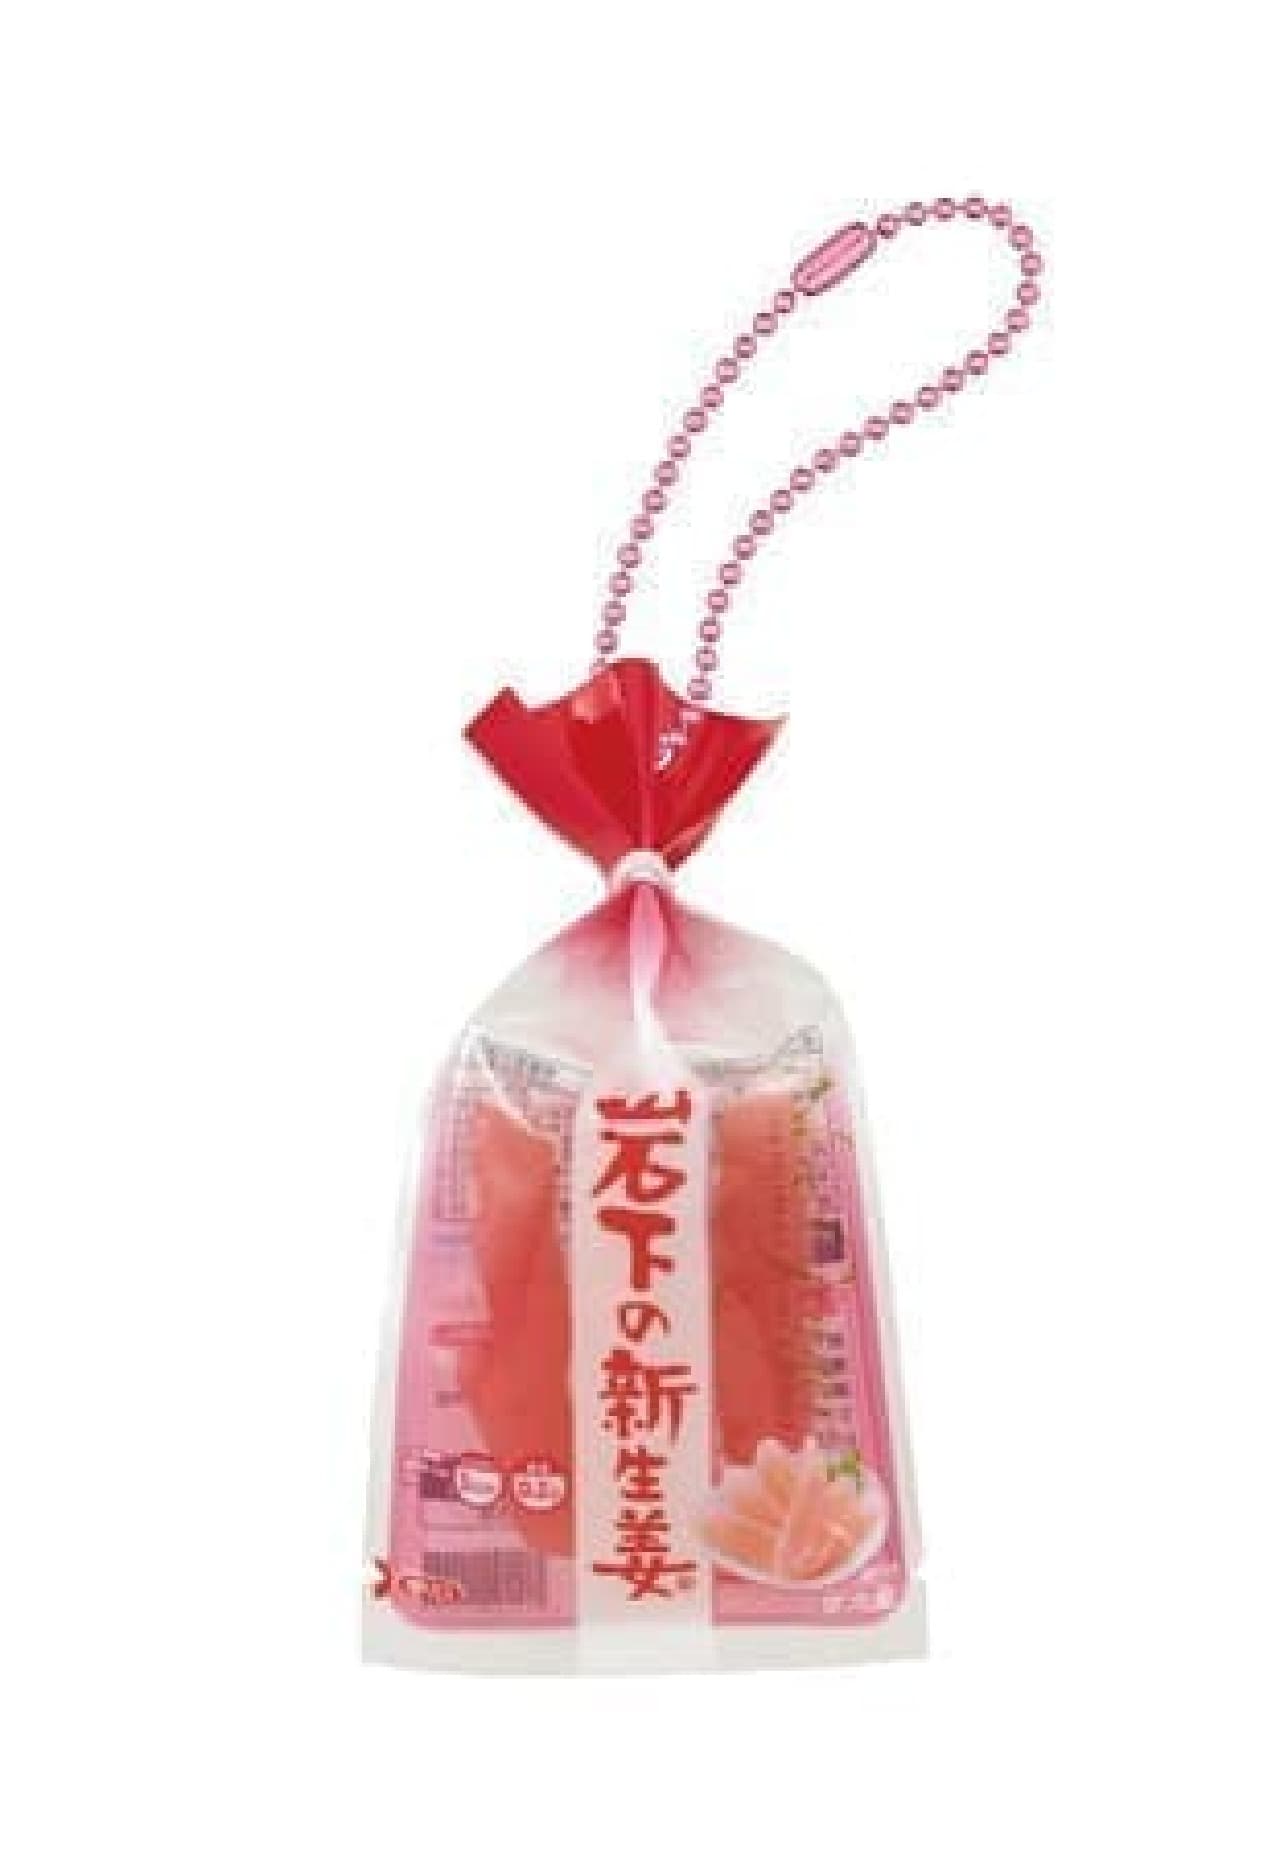 "Iwashita New Ginger Miniature Collection" Capsule Vending Machine --5 types including volume packs and slices